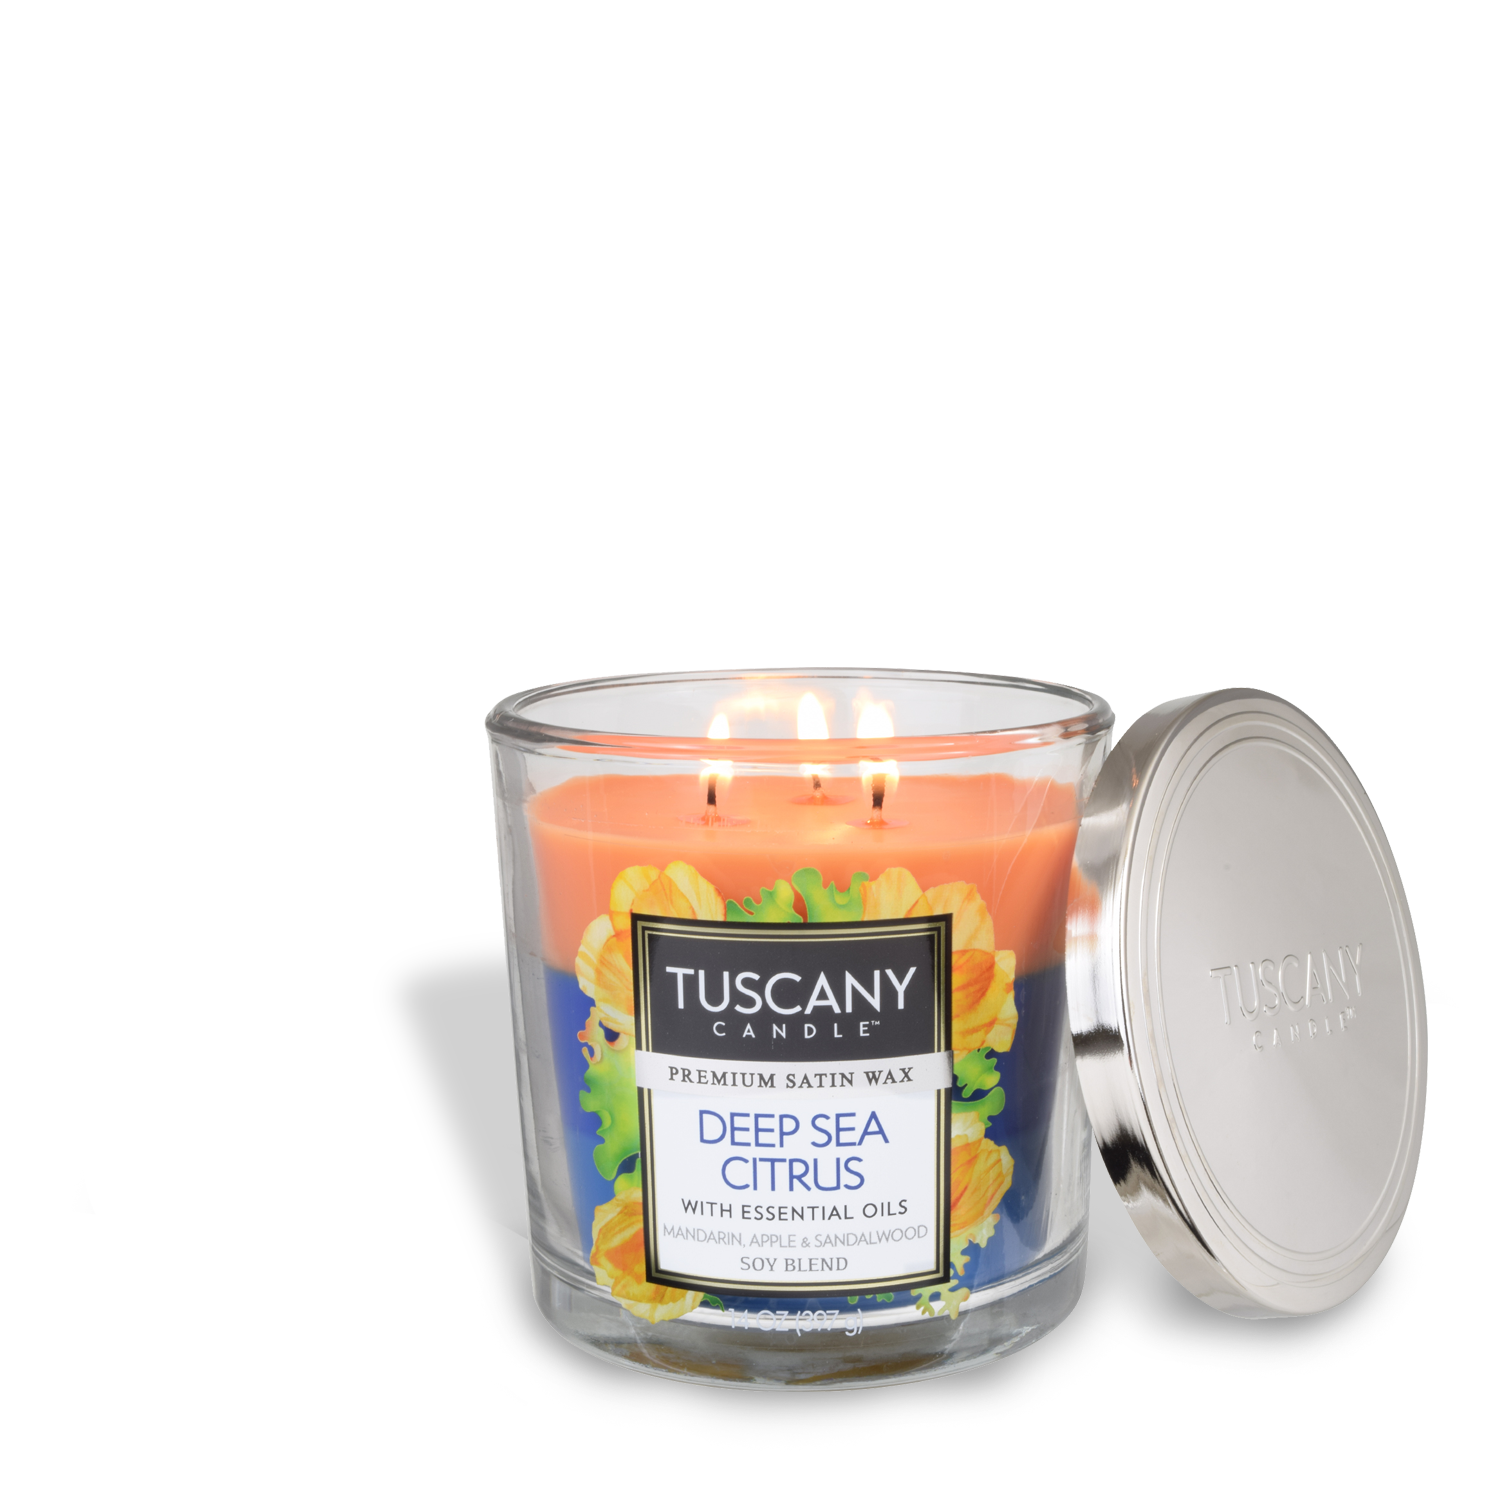 Deep Sea Citrus Long-Lasting Scented Jar Candle (14 oz) by Tuscany Candle.